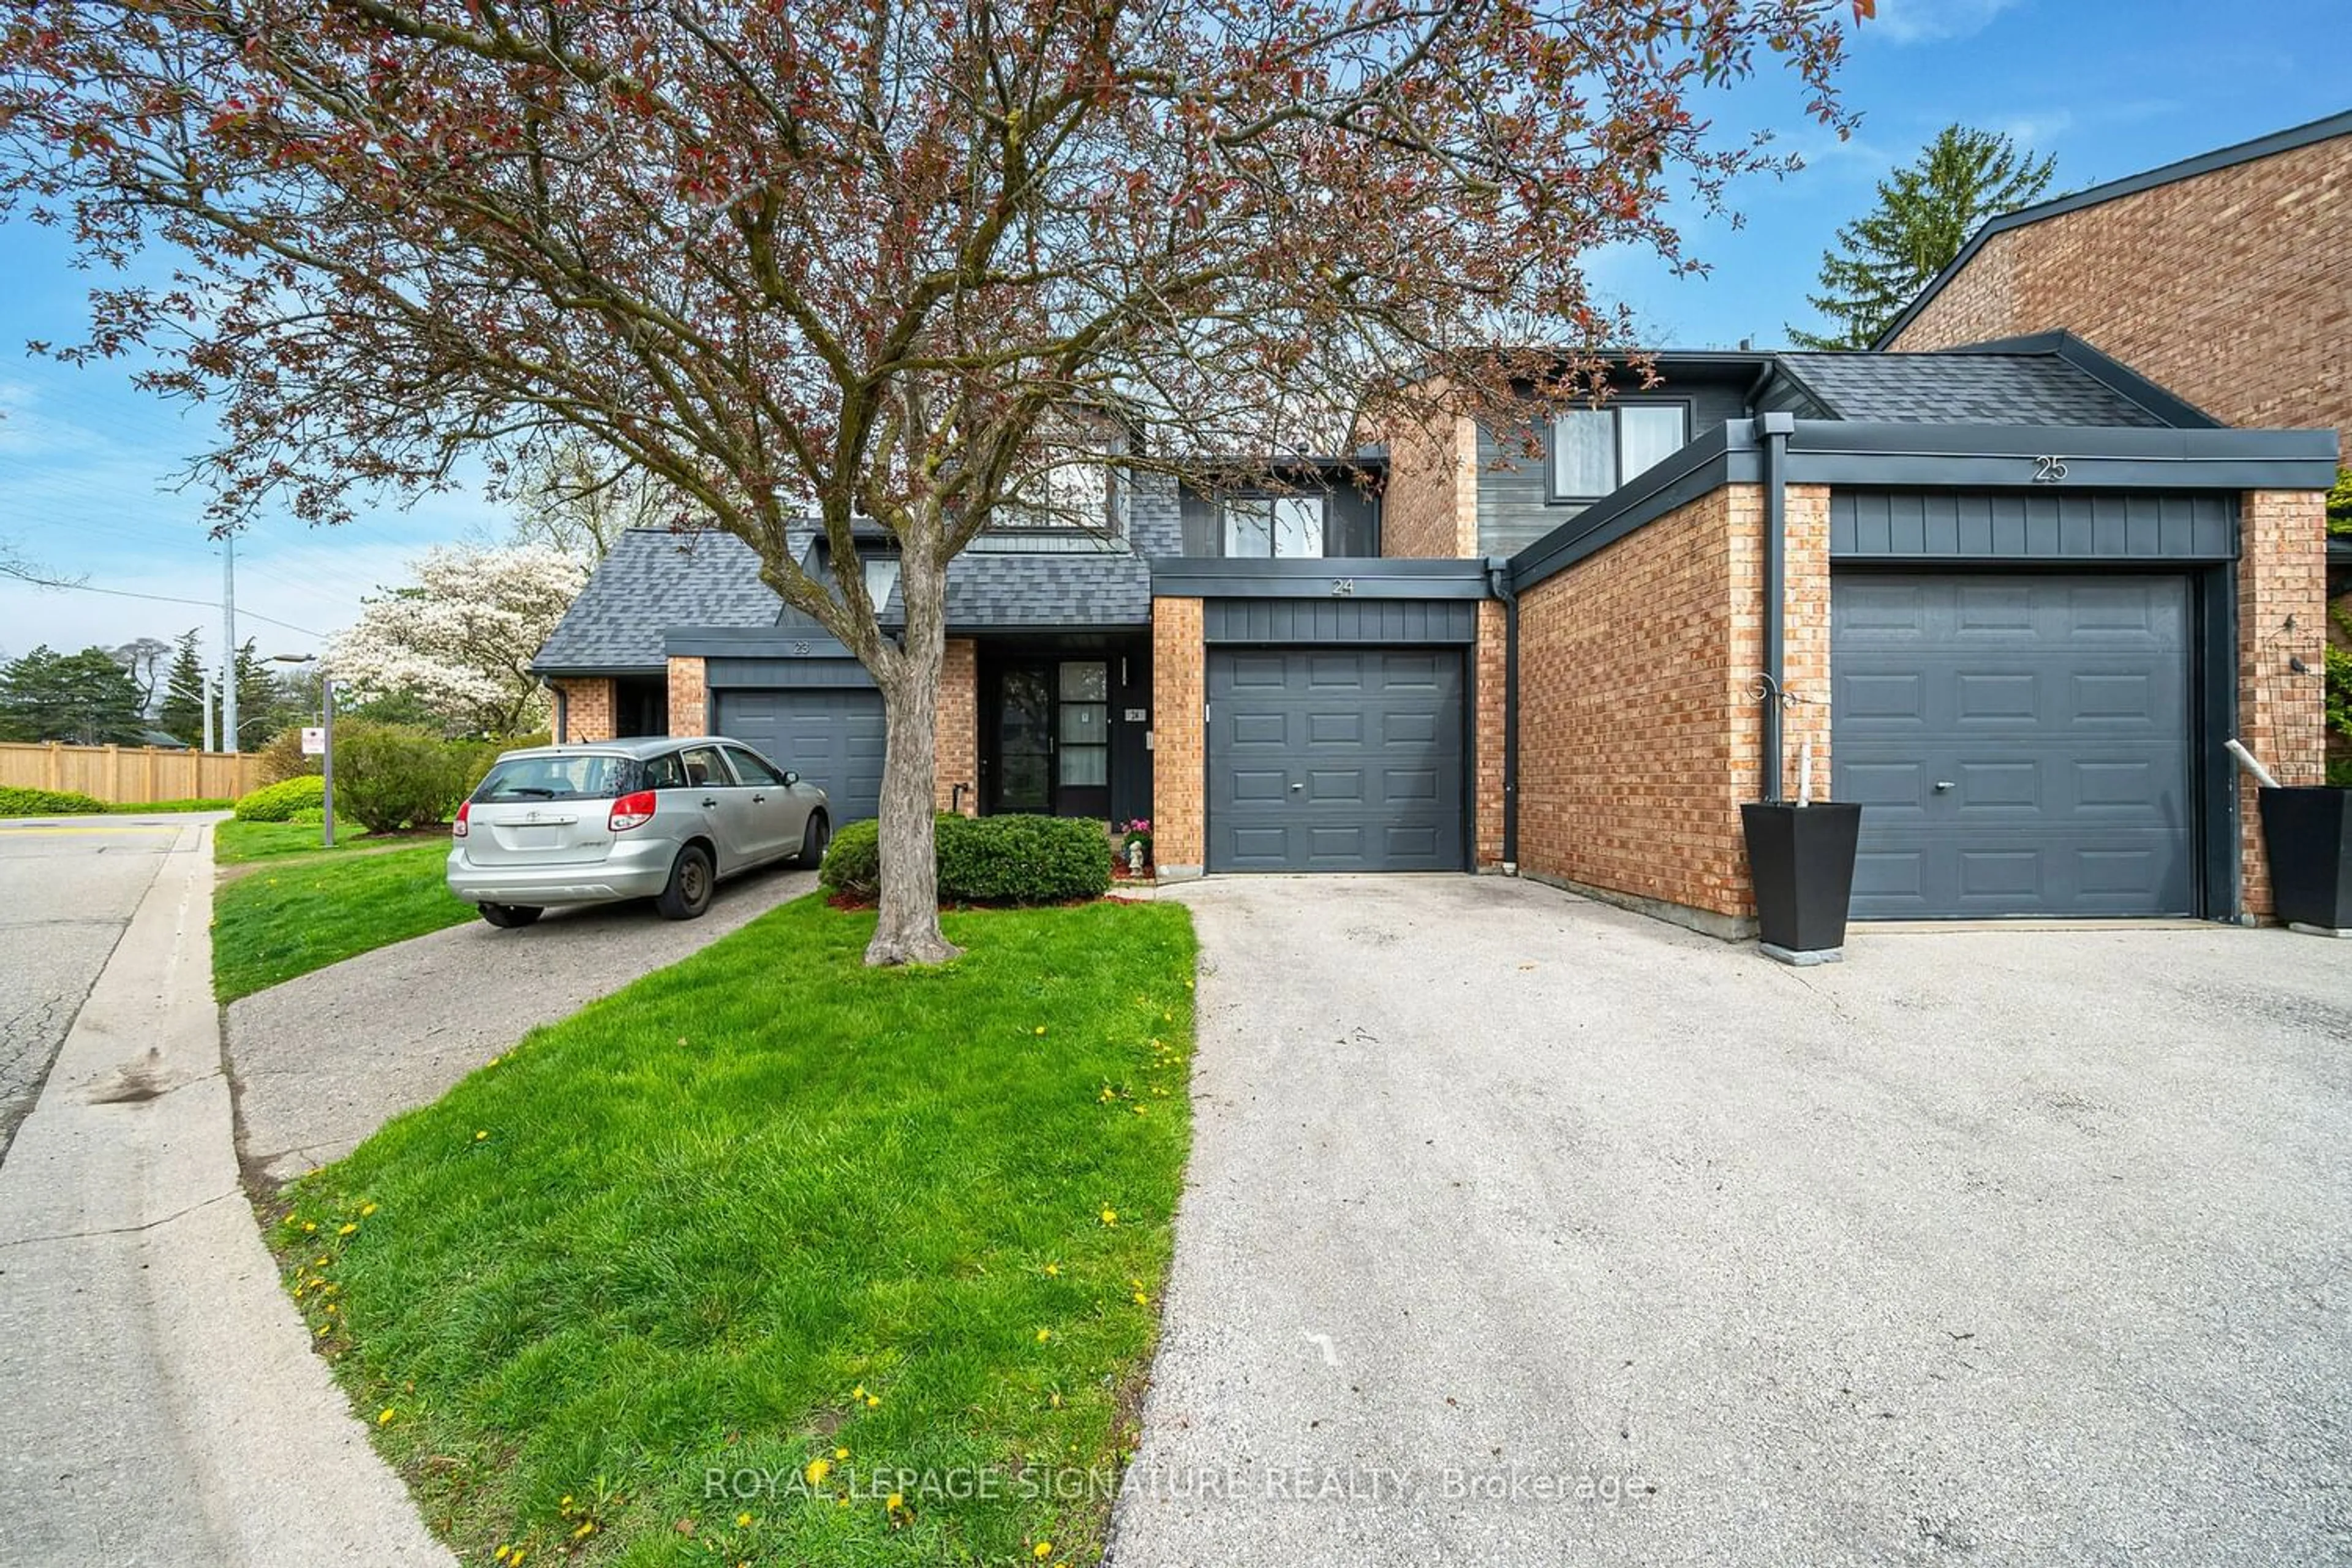 Home with brick exterior material for 20 Mineola Rd #24, Mississauga Ontario L5G 4N9